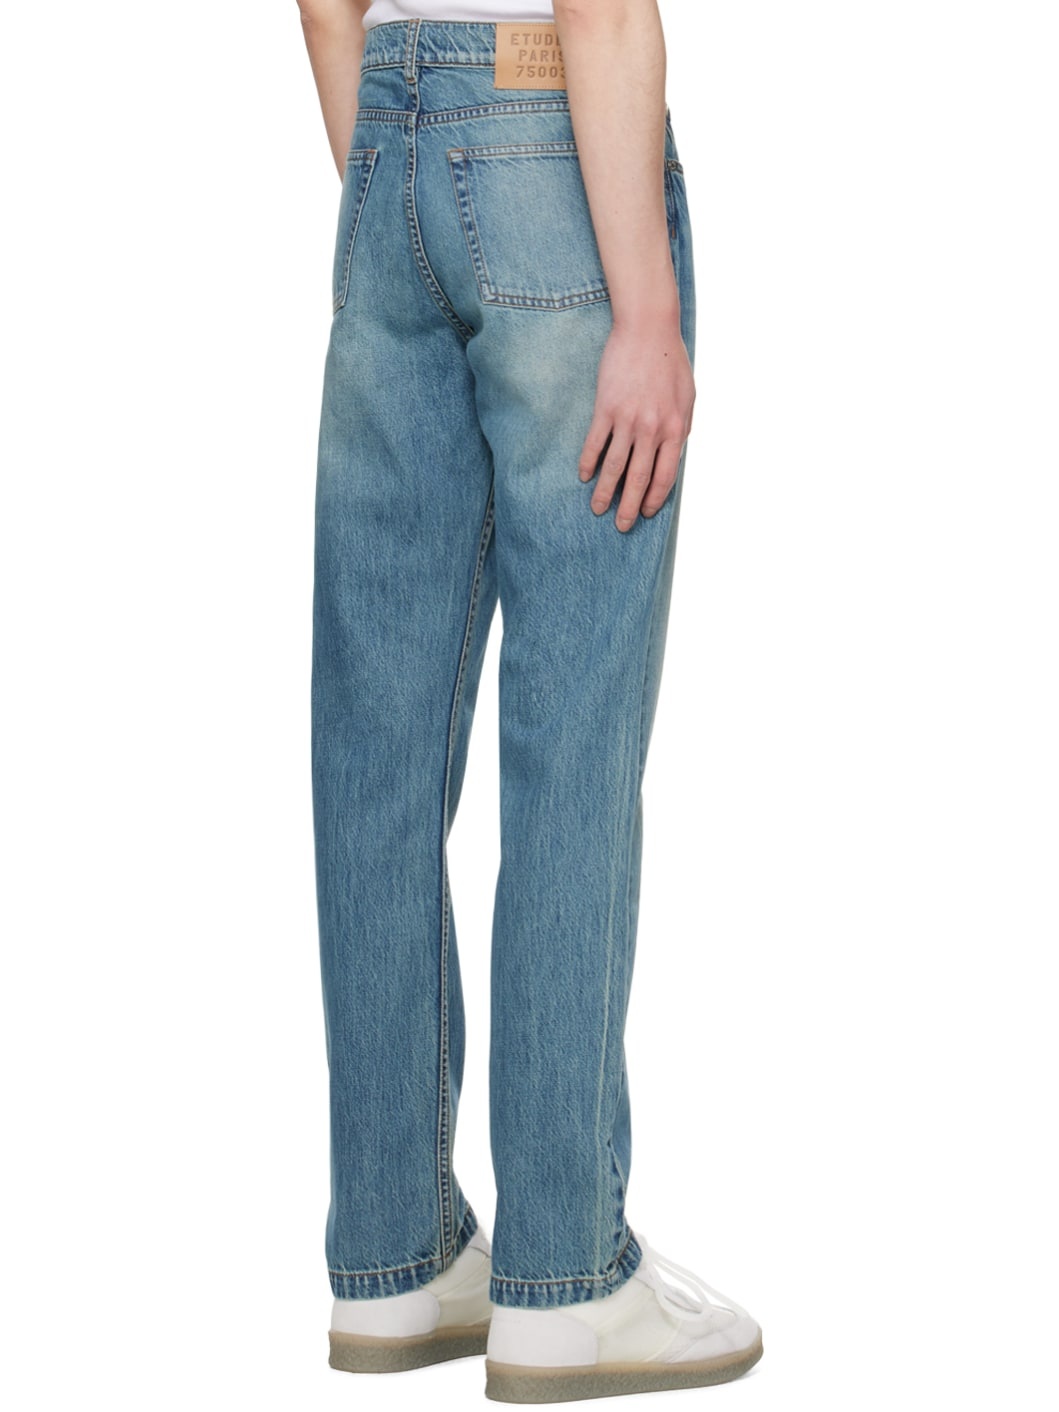 Blue Relic Jeans - 3